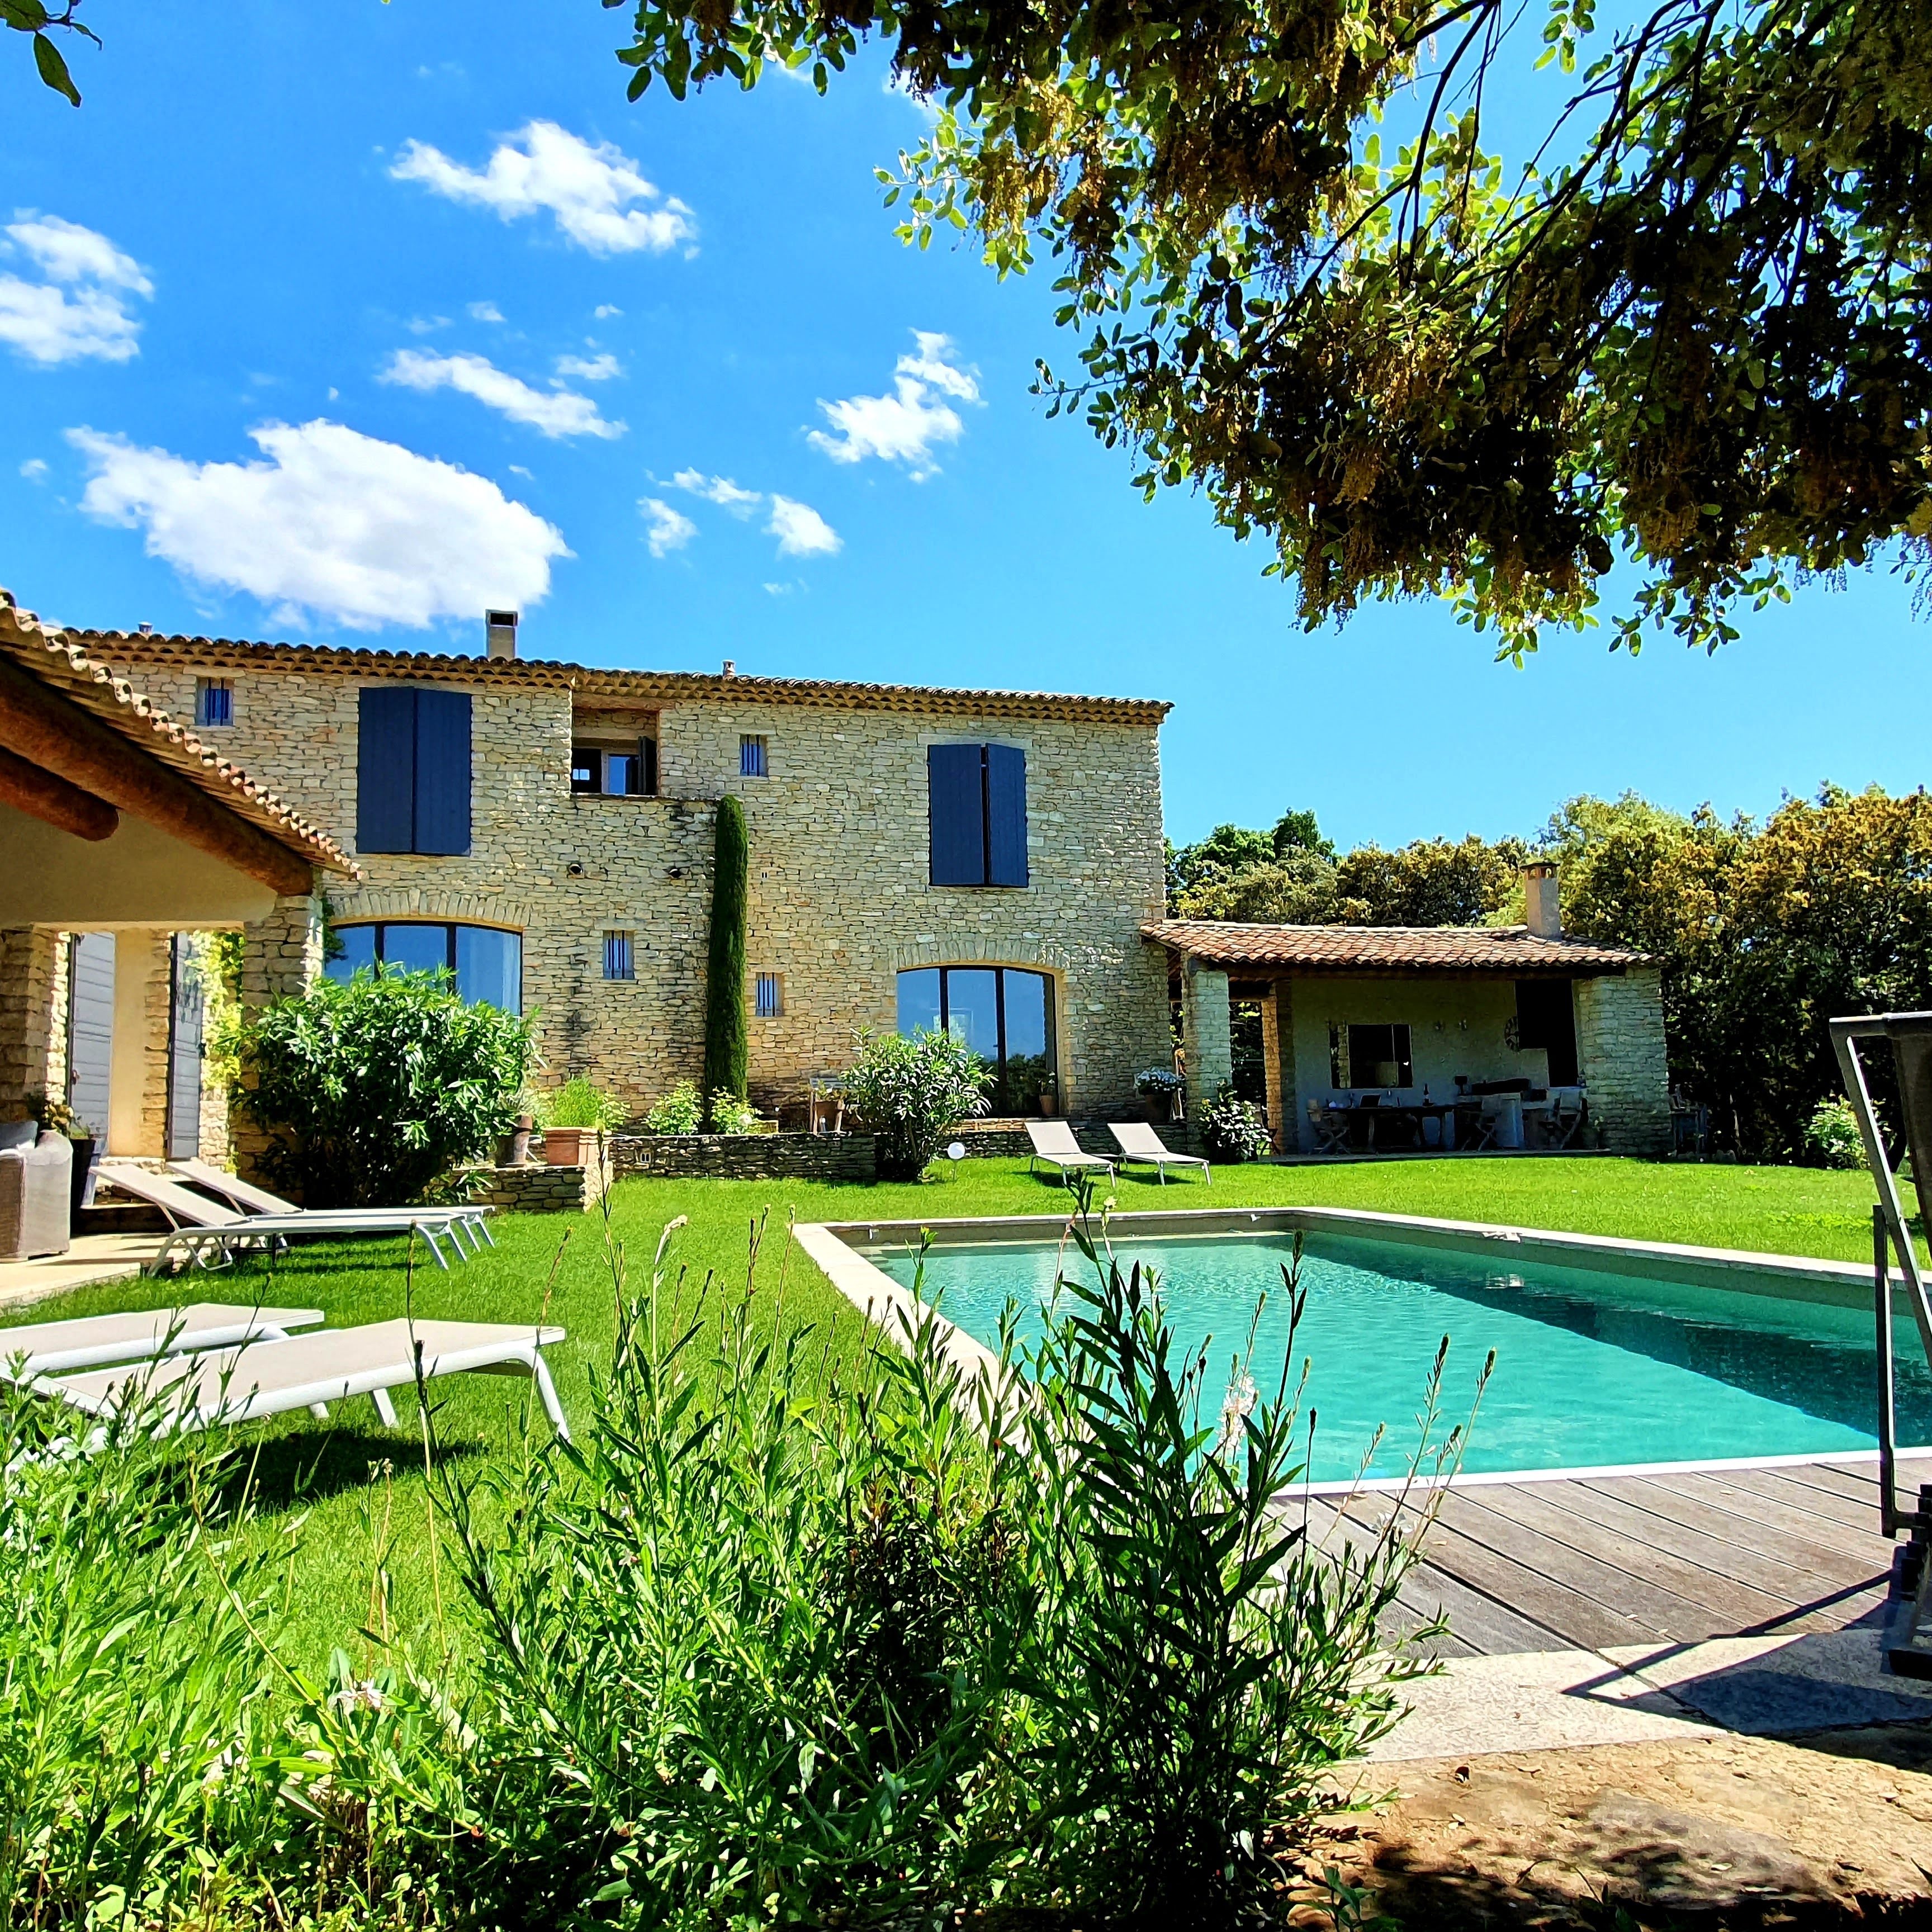 Property Image 2 - Superb air-conditioned house with heated pool in Gordes - by feelluxuryholydays